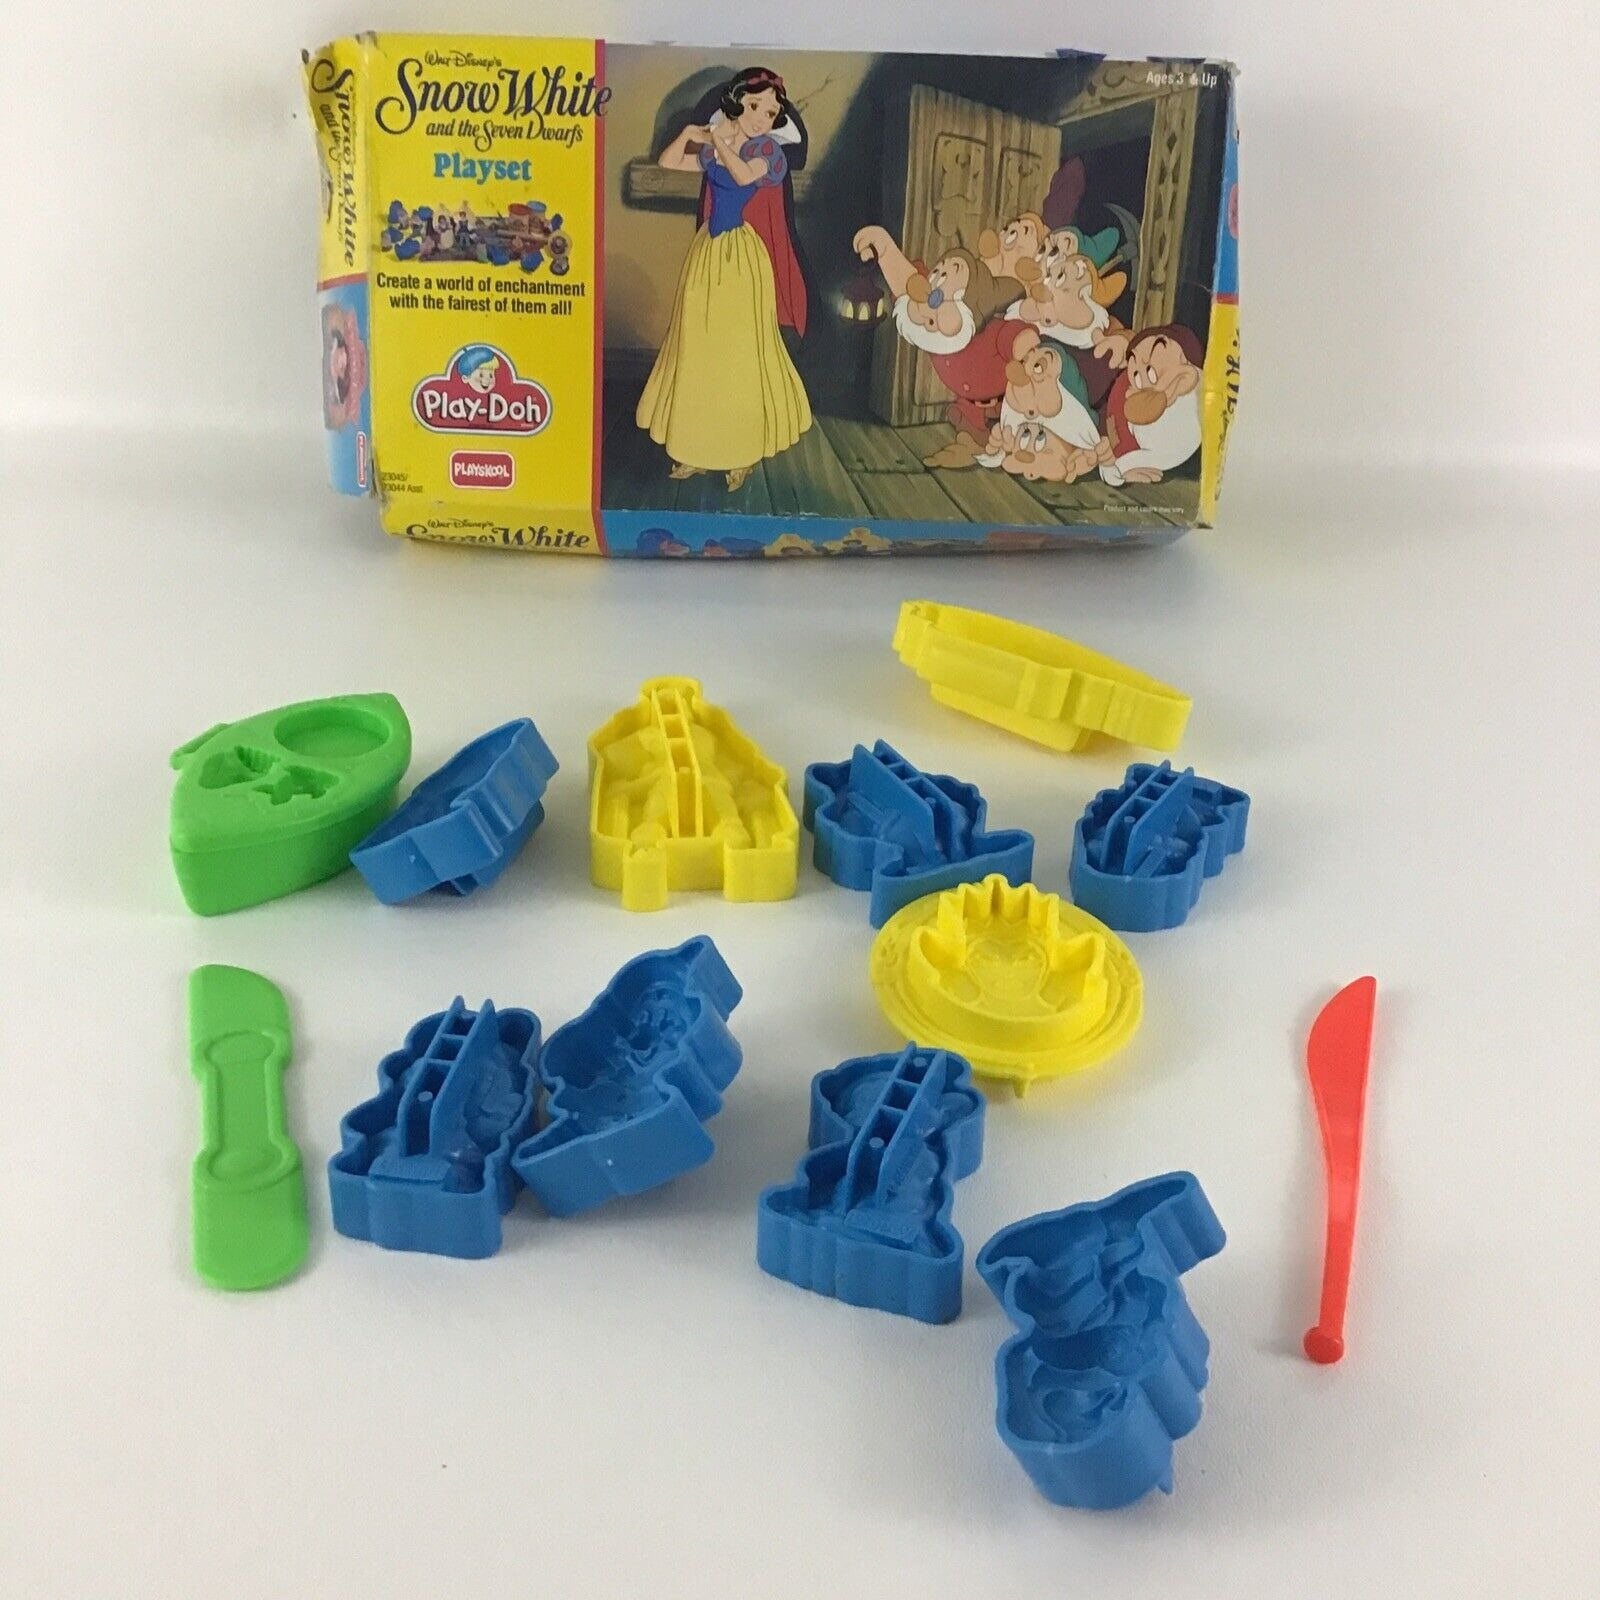 146 Piece Play-Doh School Tools Set Letters Numbers Animals Cutters Molds